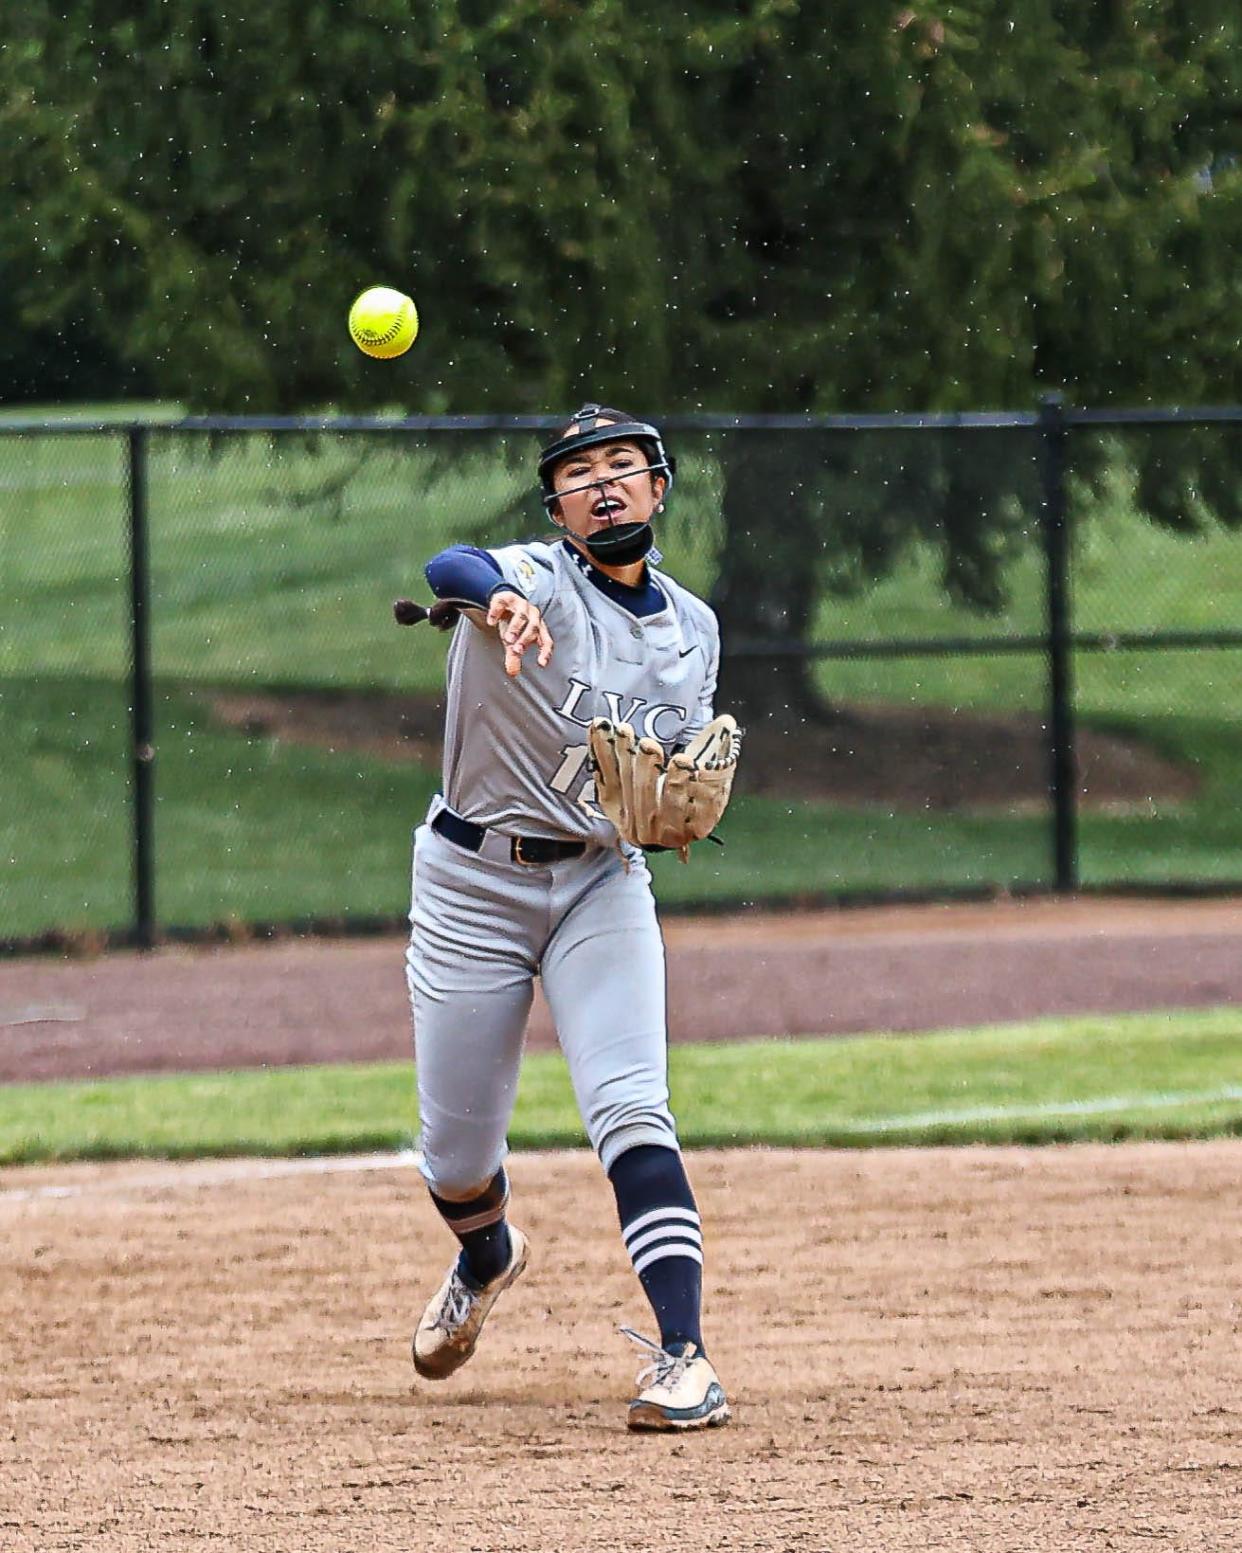 Erin Pattillo (12) fires to first after fielding a rocket hit to third base. The MAC Freedom softball championships were held at Lebanon Valley College, and the host Dutchmen played DeSales University on Saturday, May 4, 2024. LVC defeated DeSales, 1-0, and received an automatic bid to the NCAA tournament.